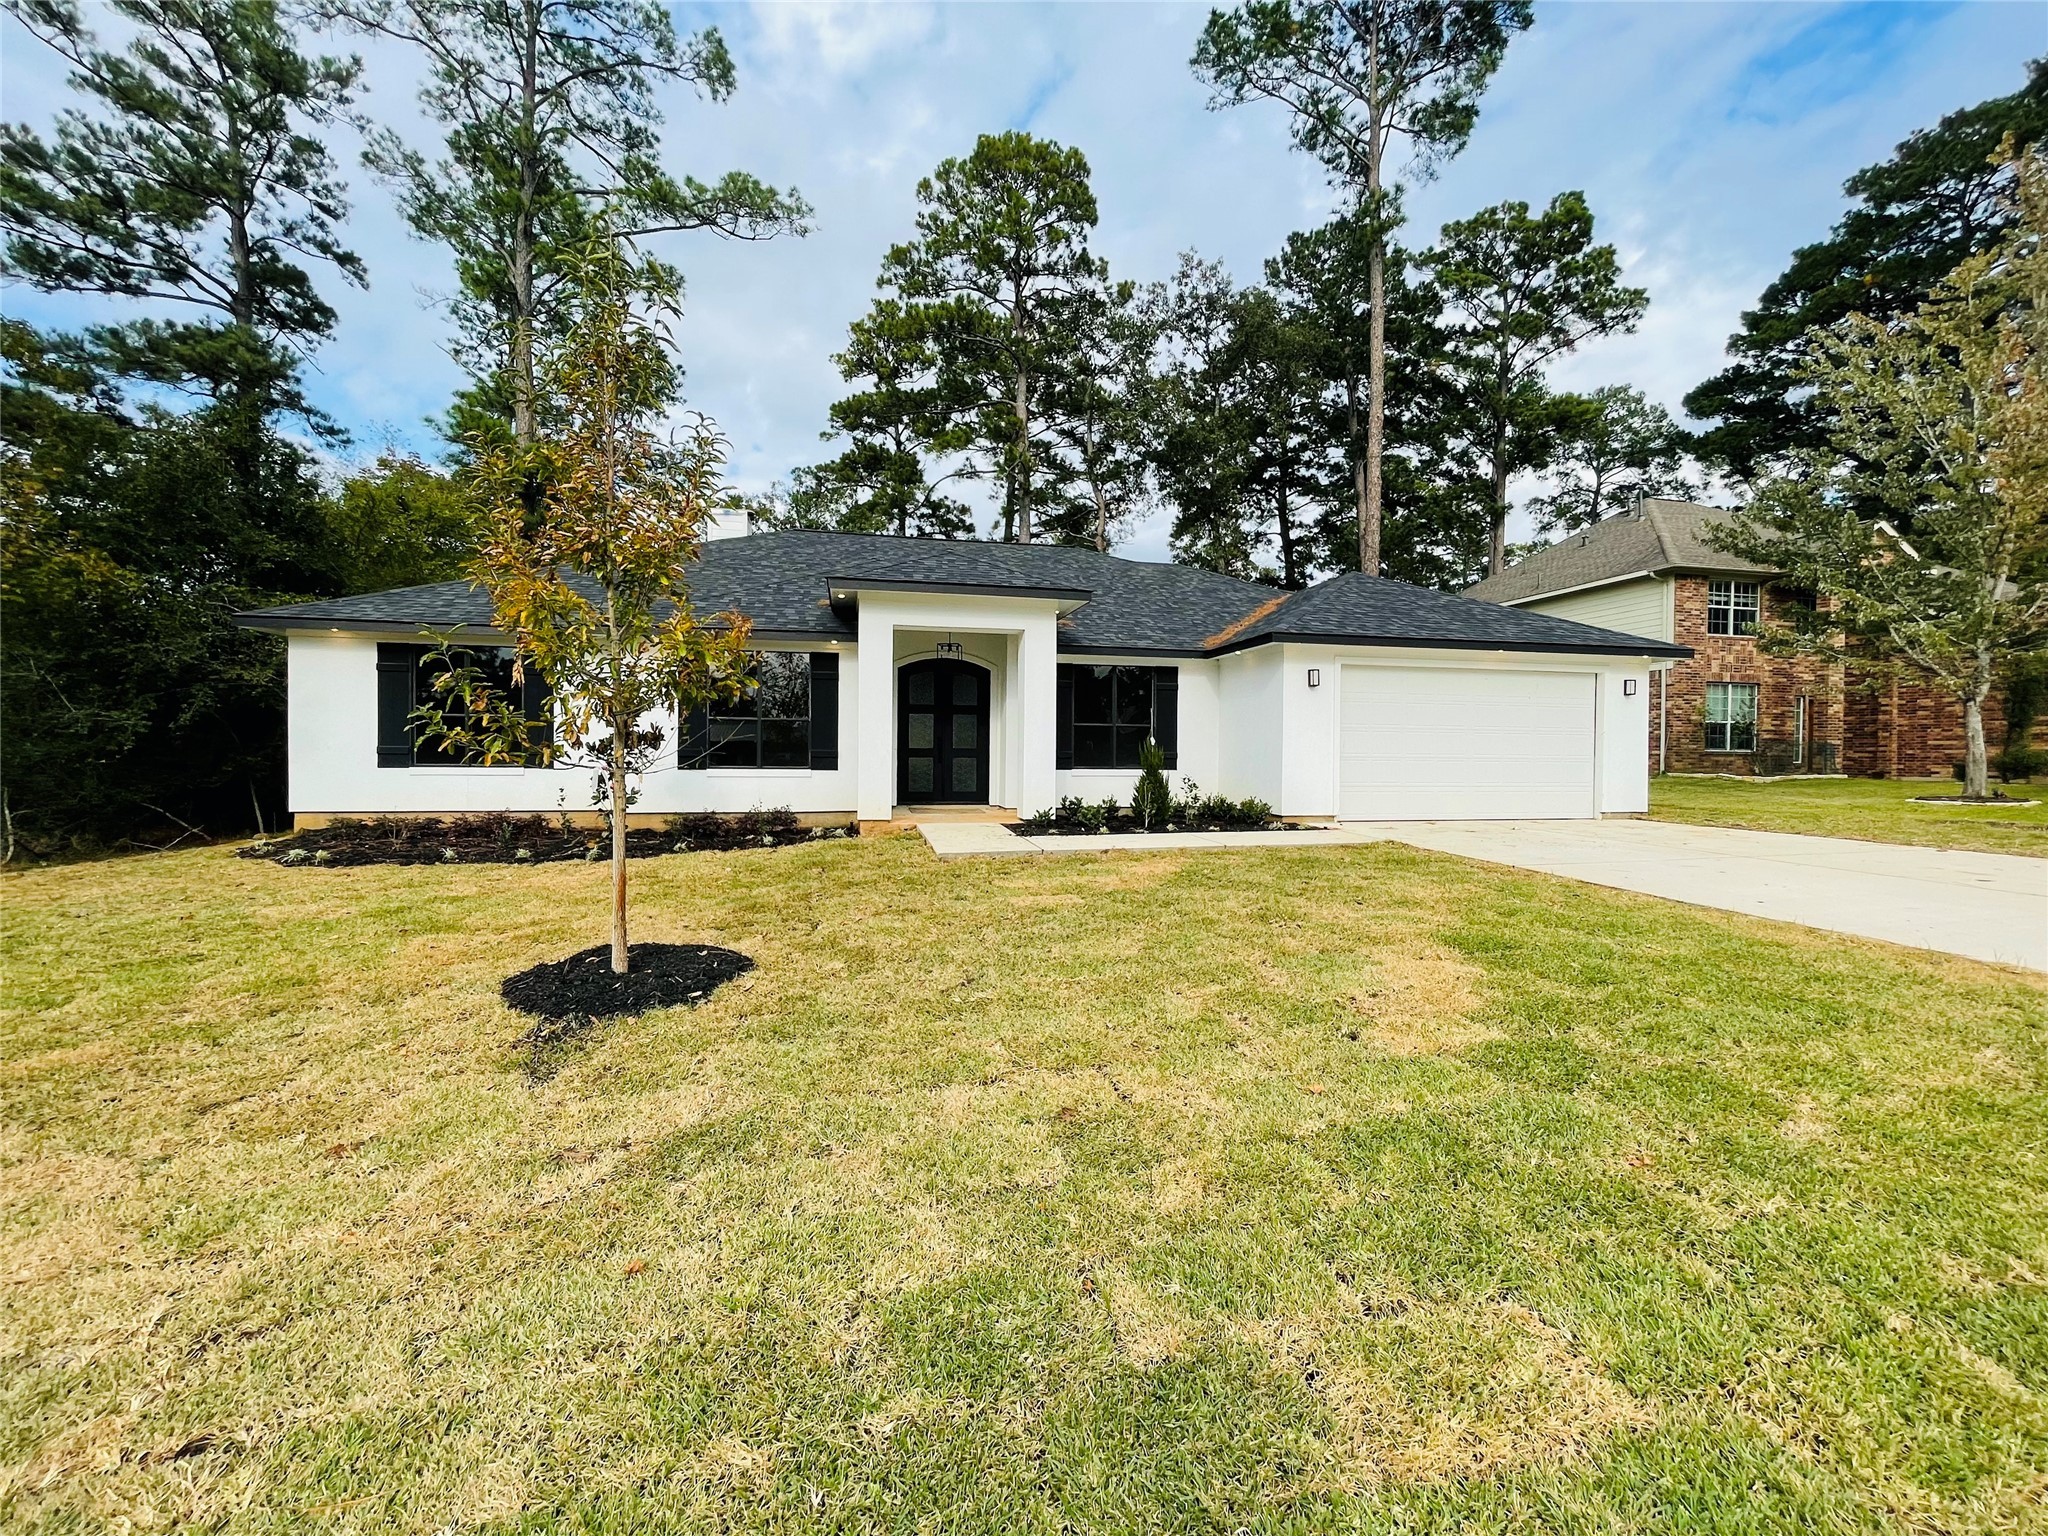 Welcome home to this 3 bedroom/3 bathroom/2 car garage home.  You won't want to miss this one with gorgeous appointments throughout.  For all that dislike carpet this home has NONE!!!  White stucco front/black window trim and shutters. Large lot!!